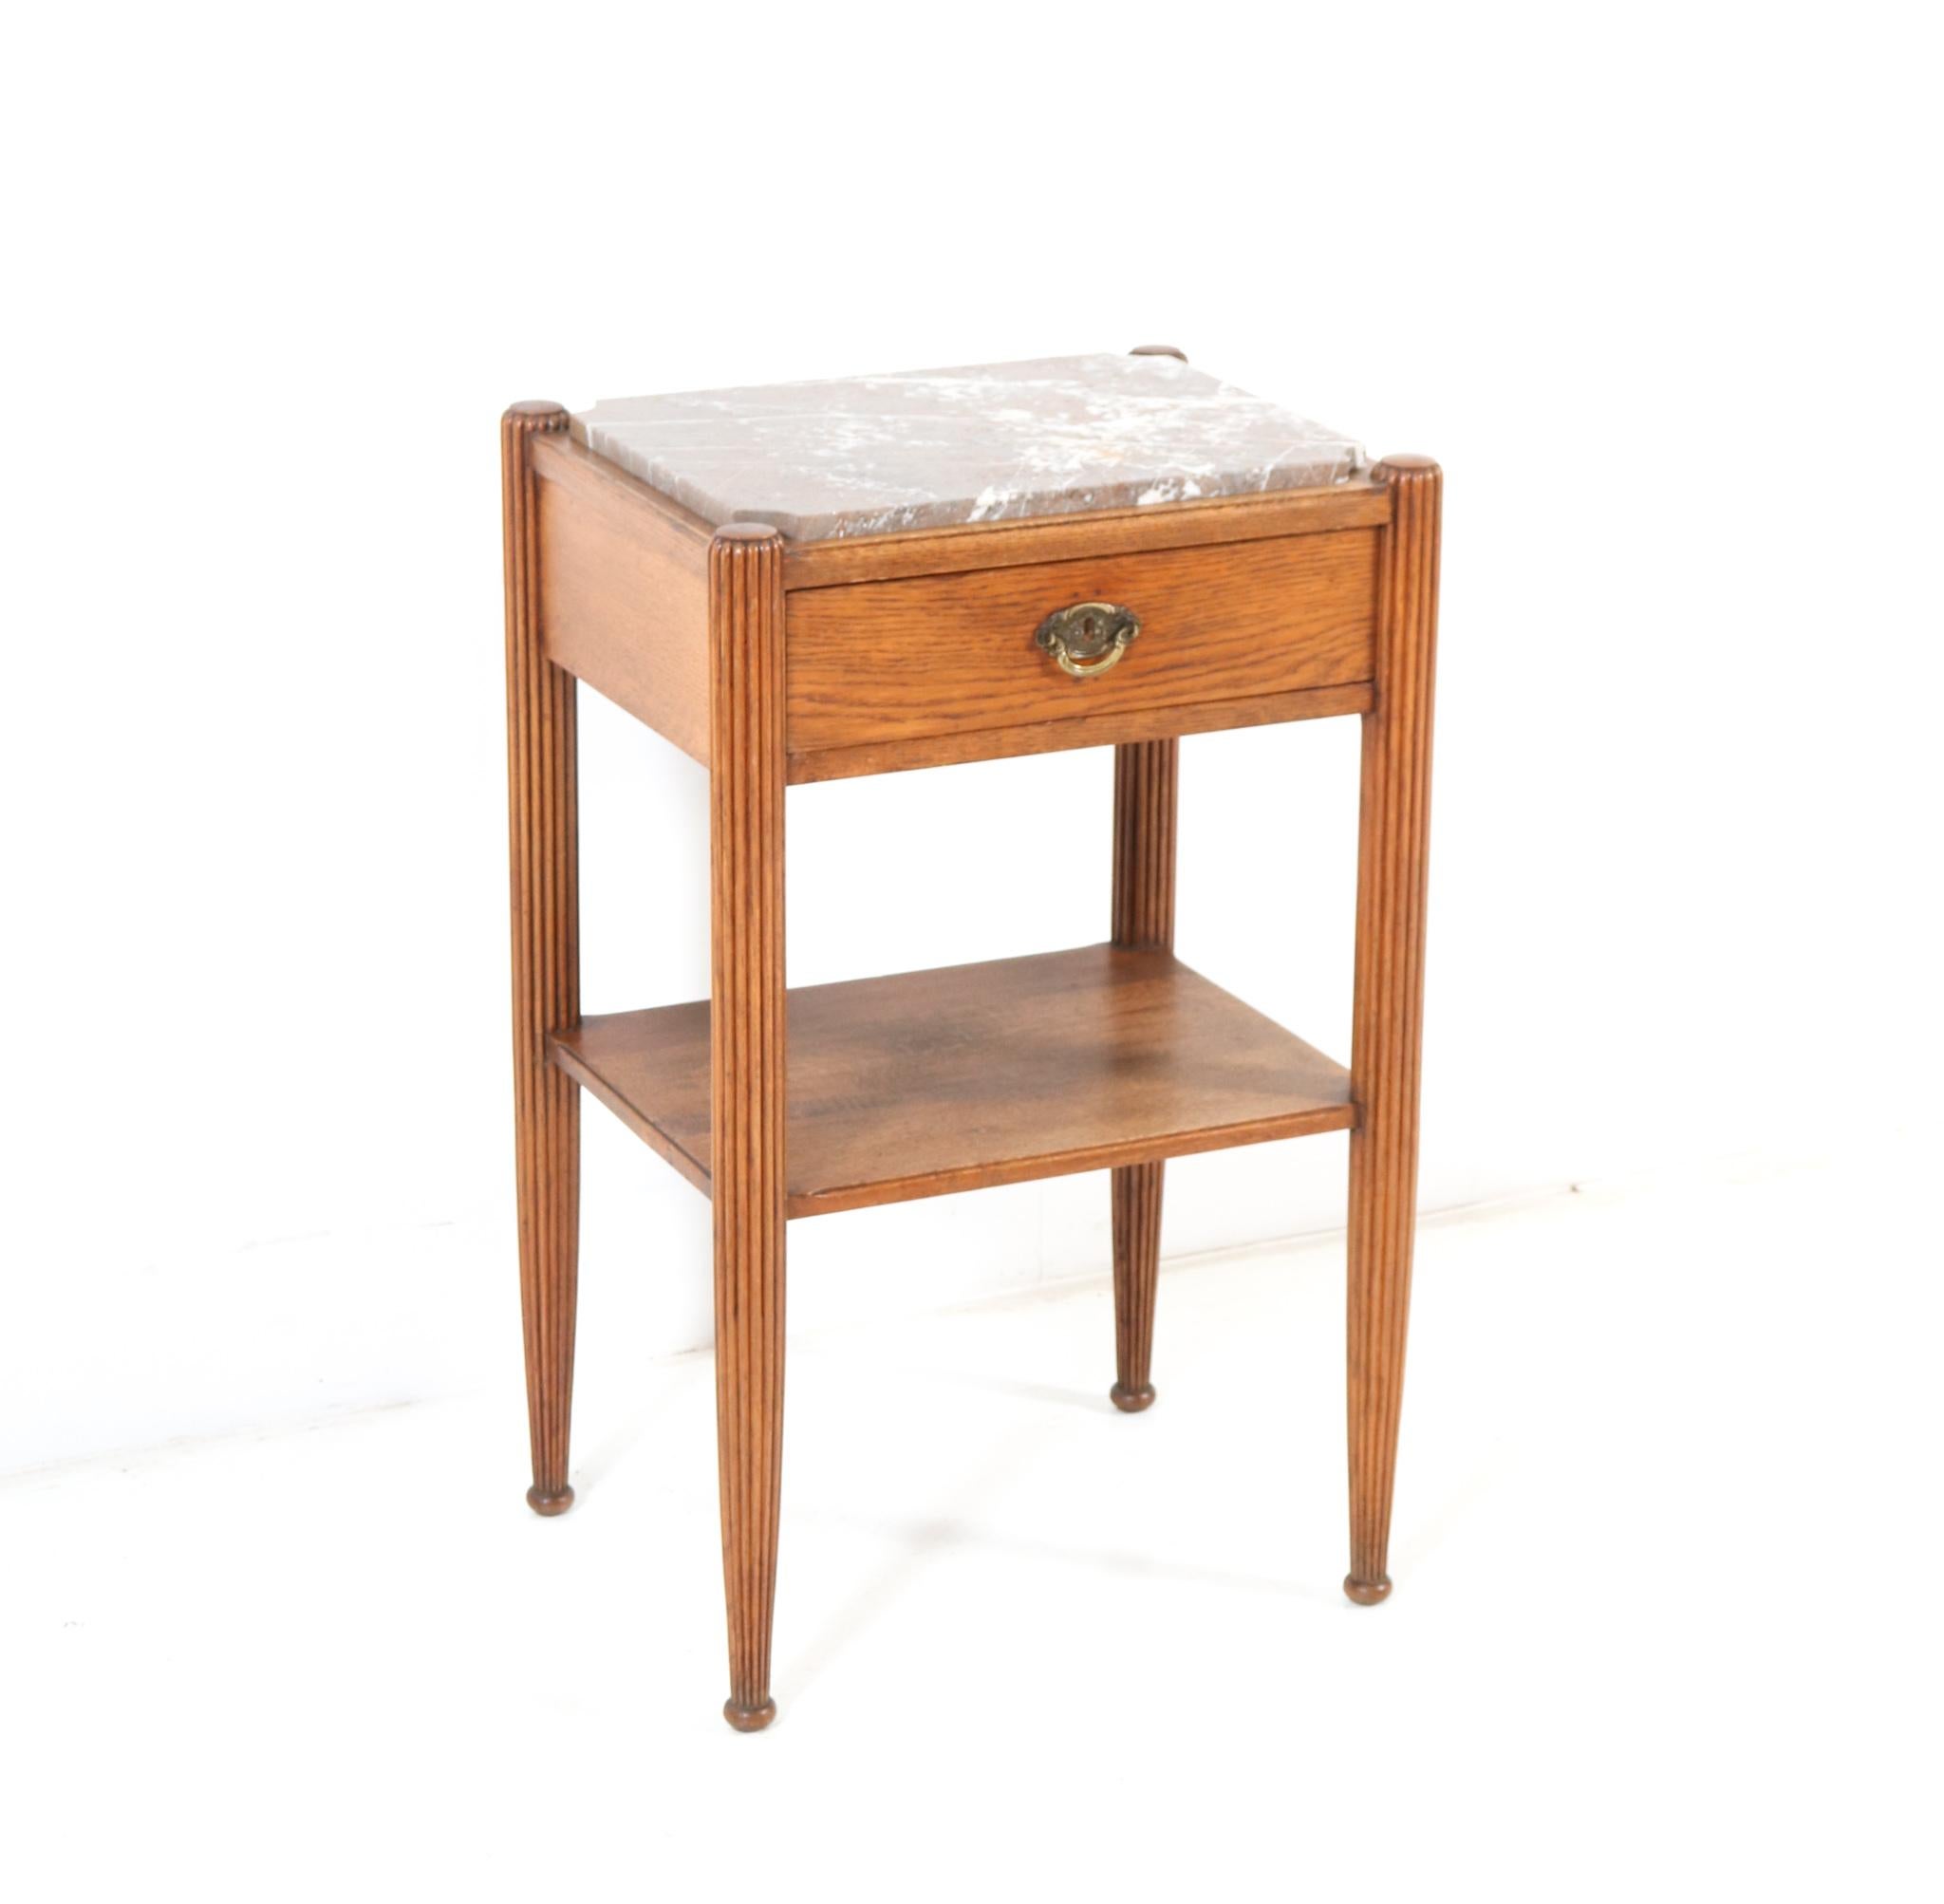 Stunning and rare Art Deco side table.
Striking French design from the 1930s.
Solid oak with original colored marble top.
The drawer has the original brass handle.
This wonderful Art Deco side table is in very good condition with minor wear